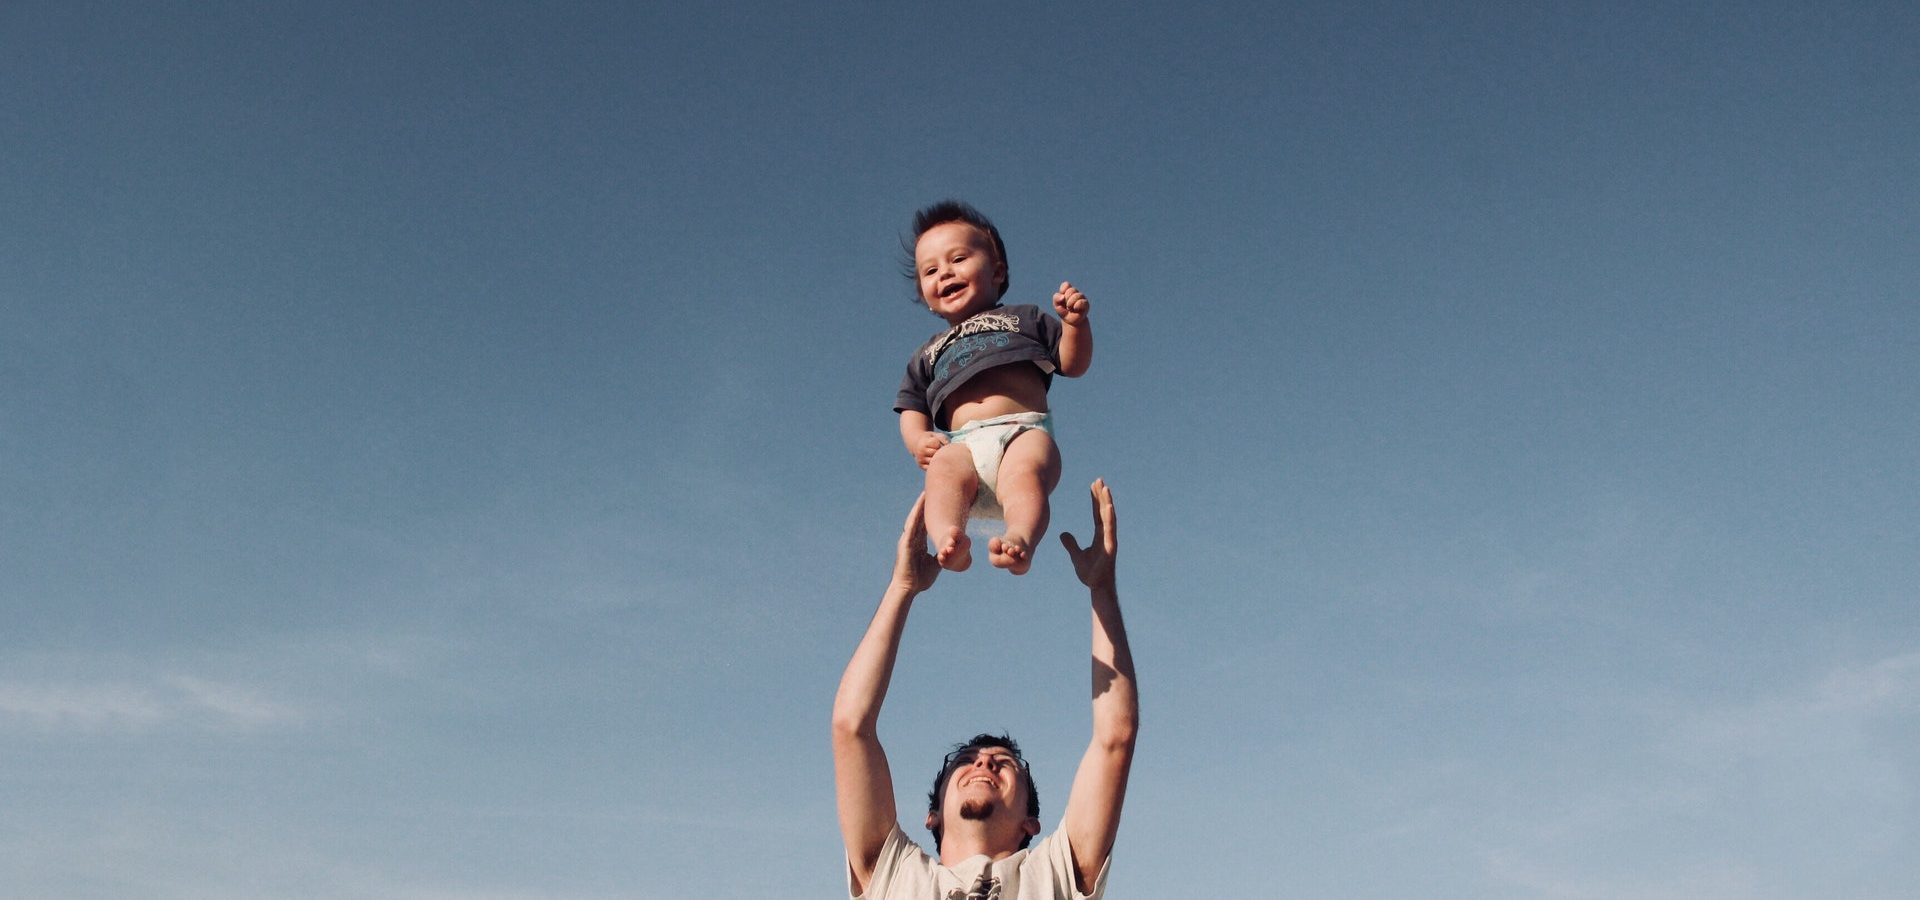 Dad raising his son in the air on a sunny day